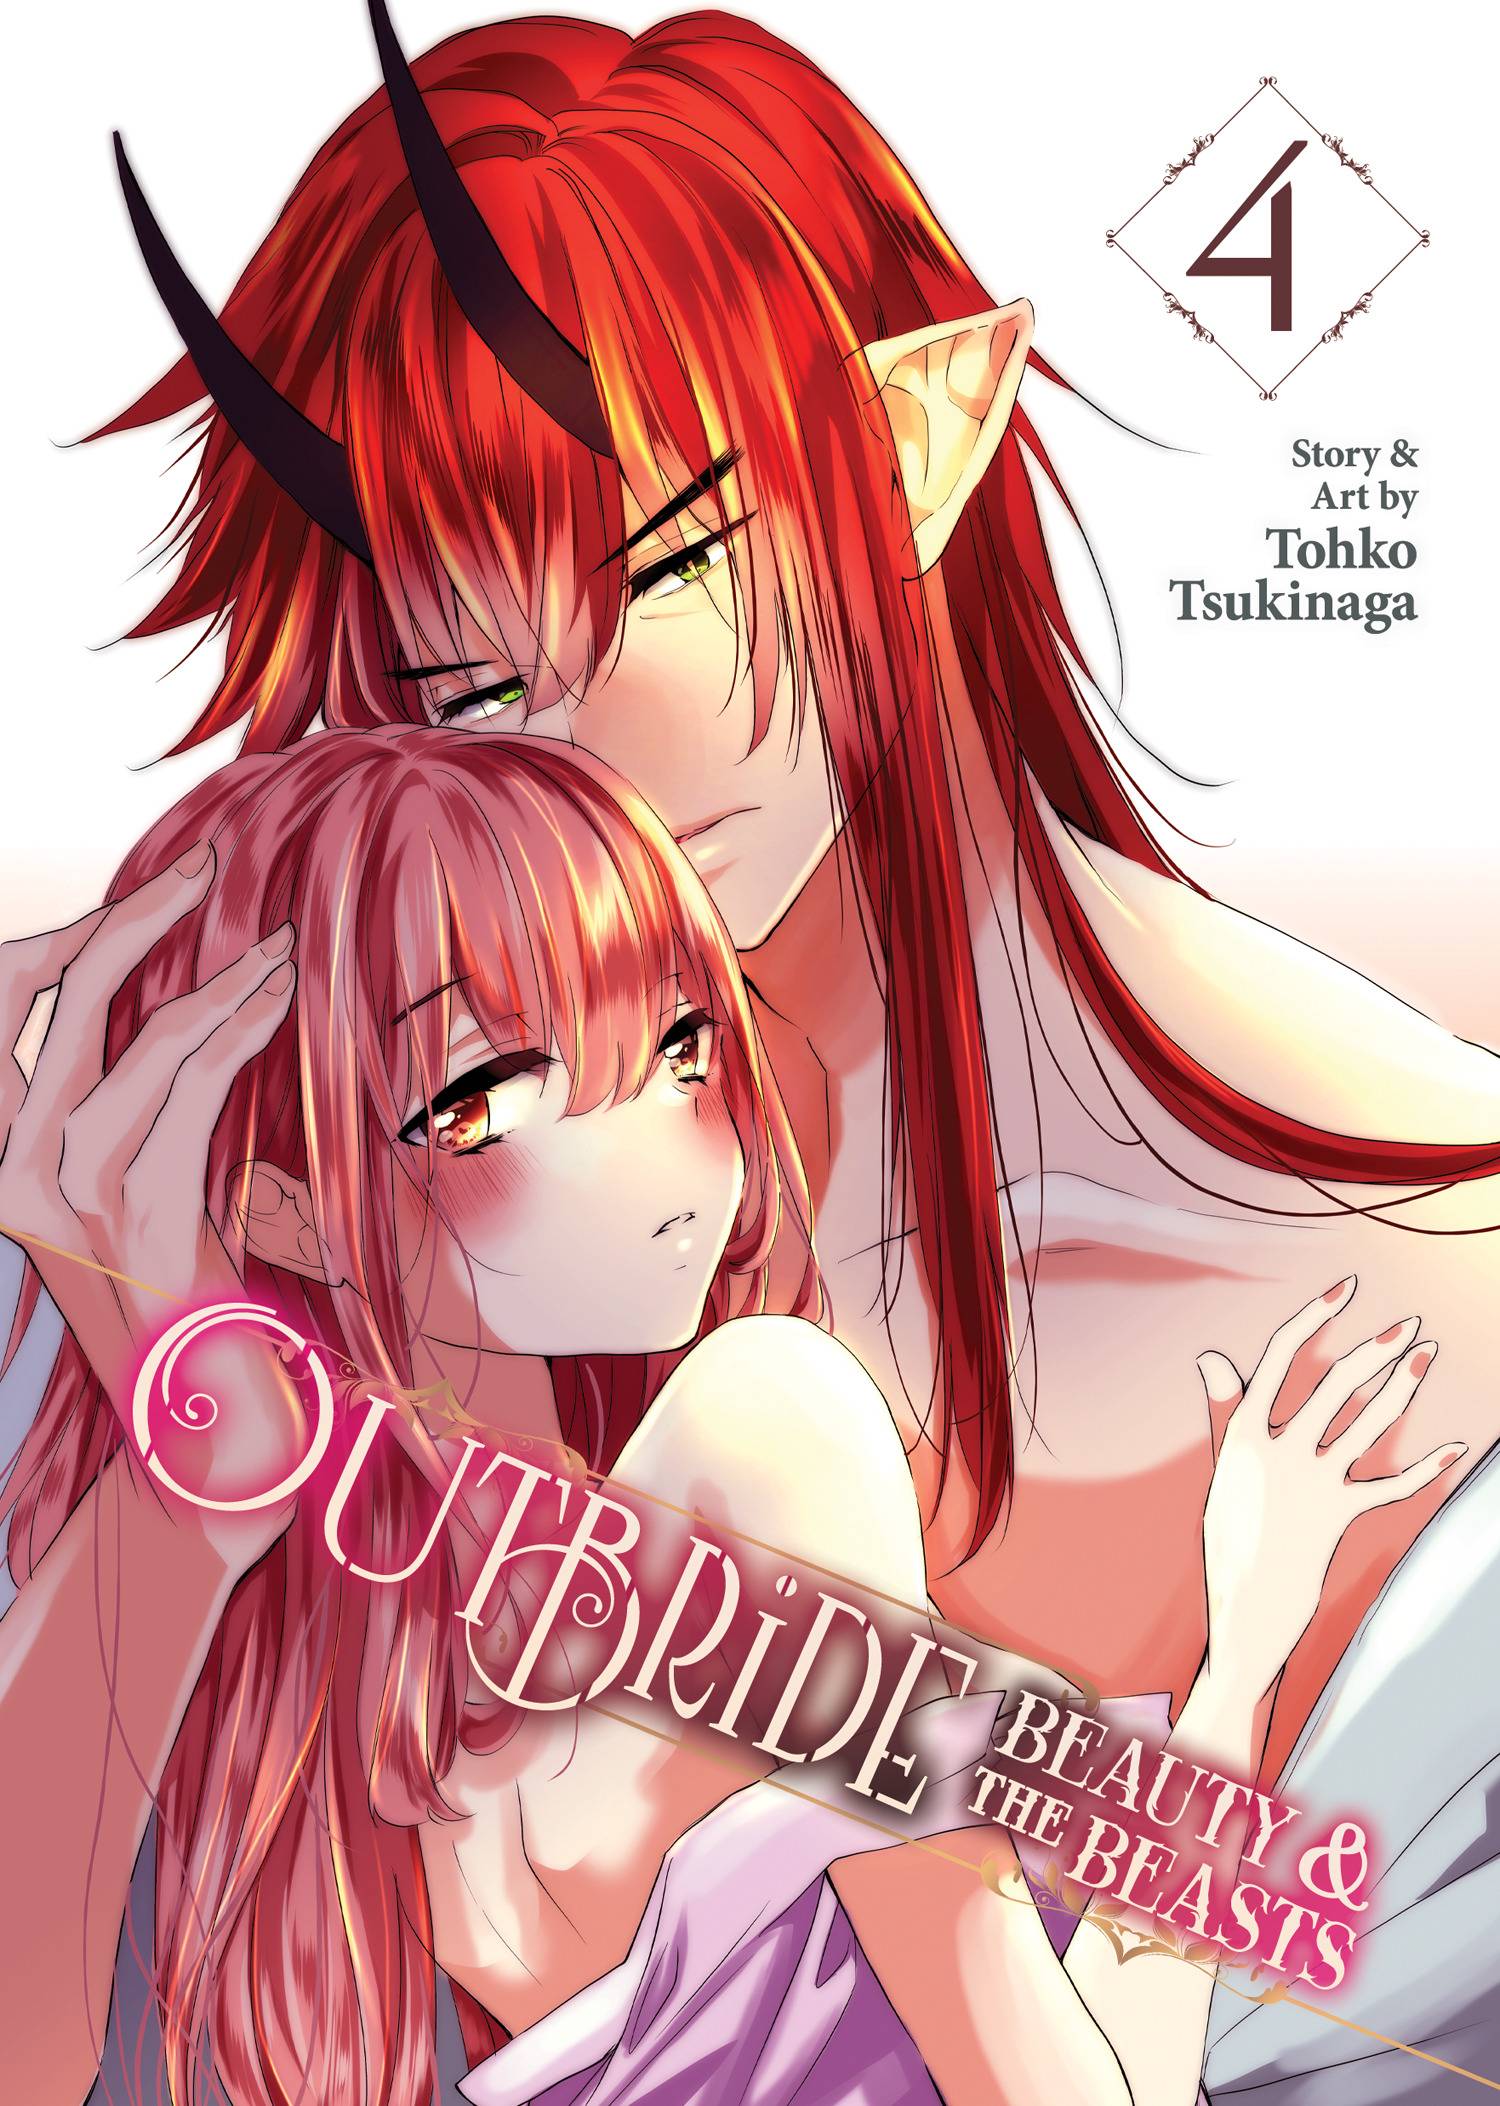 OUTBRIDE BEAUTY & BEASTS GN VOL 04